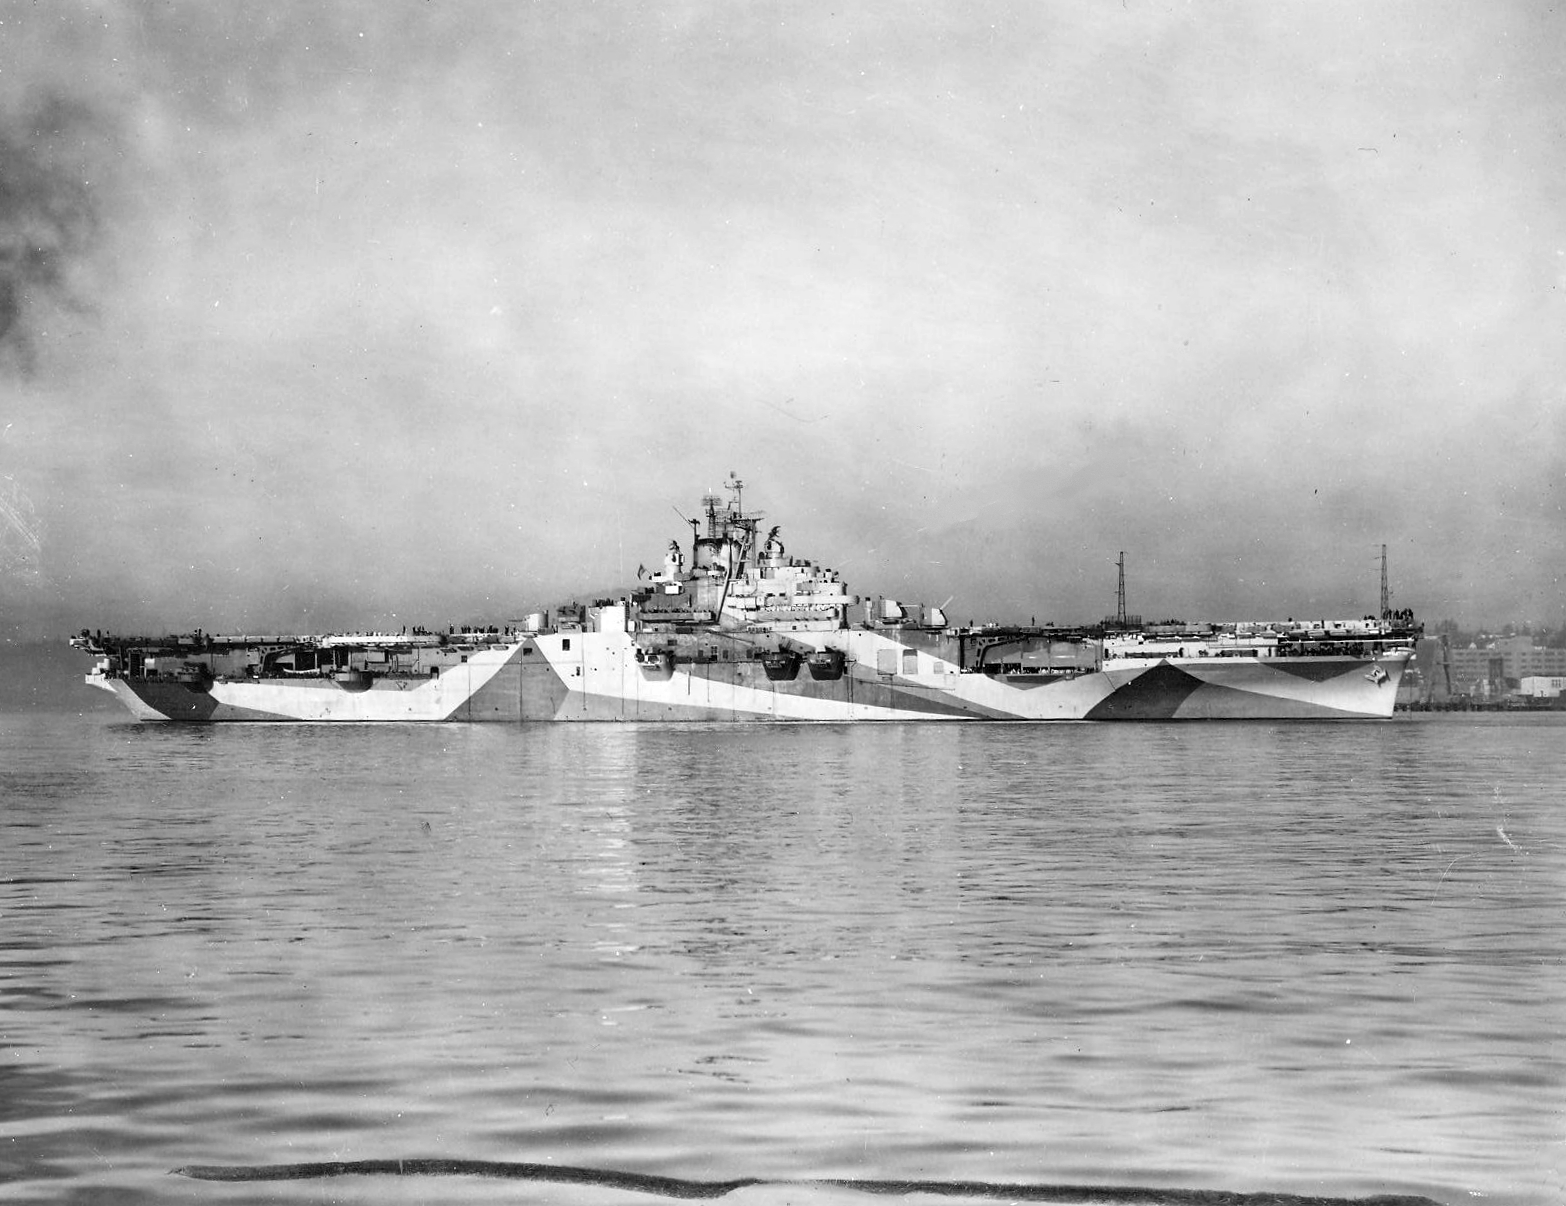 Carrier Yorktown (Essex-class) in camouflage Measure MS-33/10a at Puget Sound, Washington, US, Oct 1944.